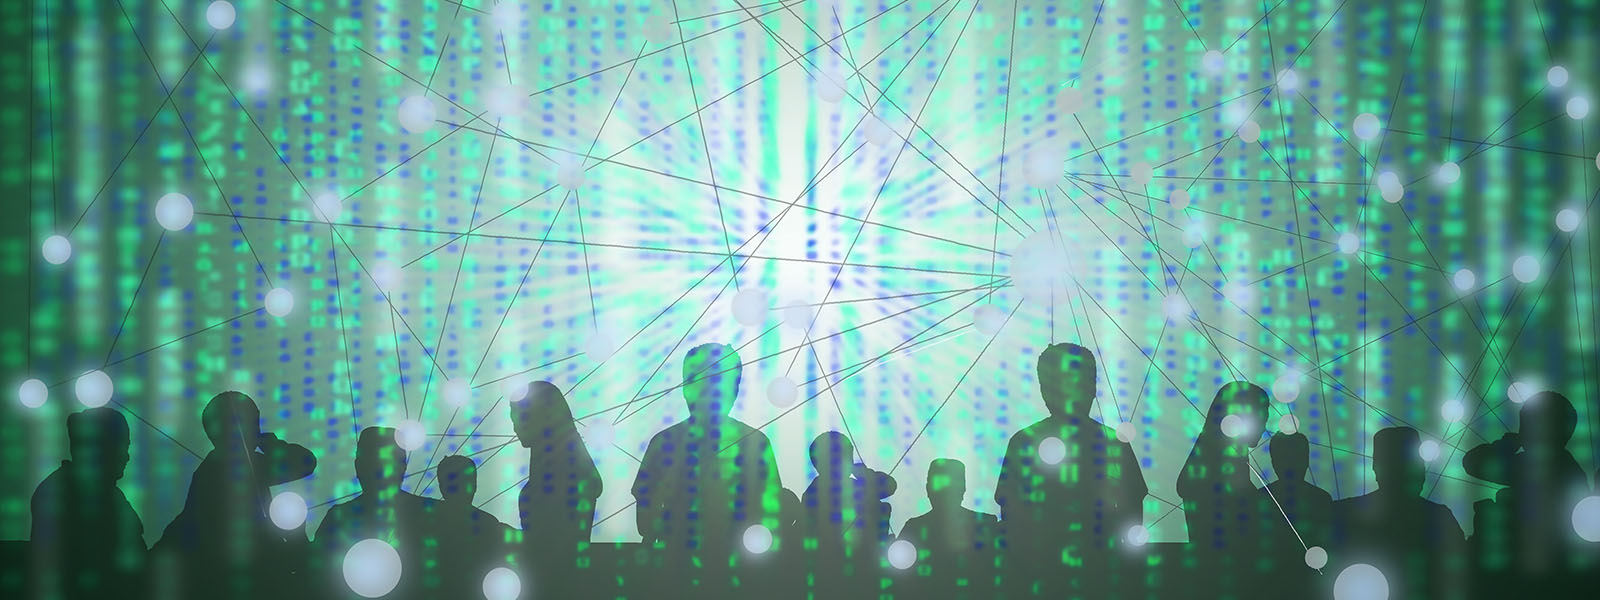 Double exposure of silhouette of peoples with binary code abstract background.